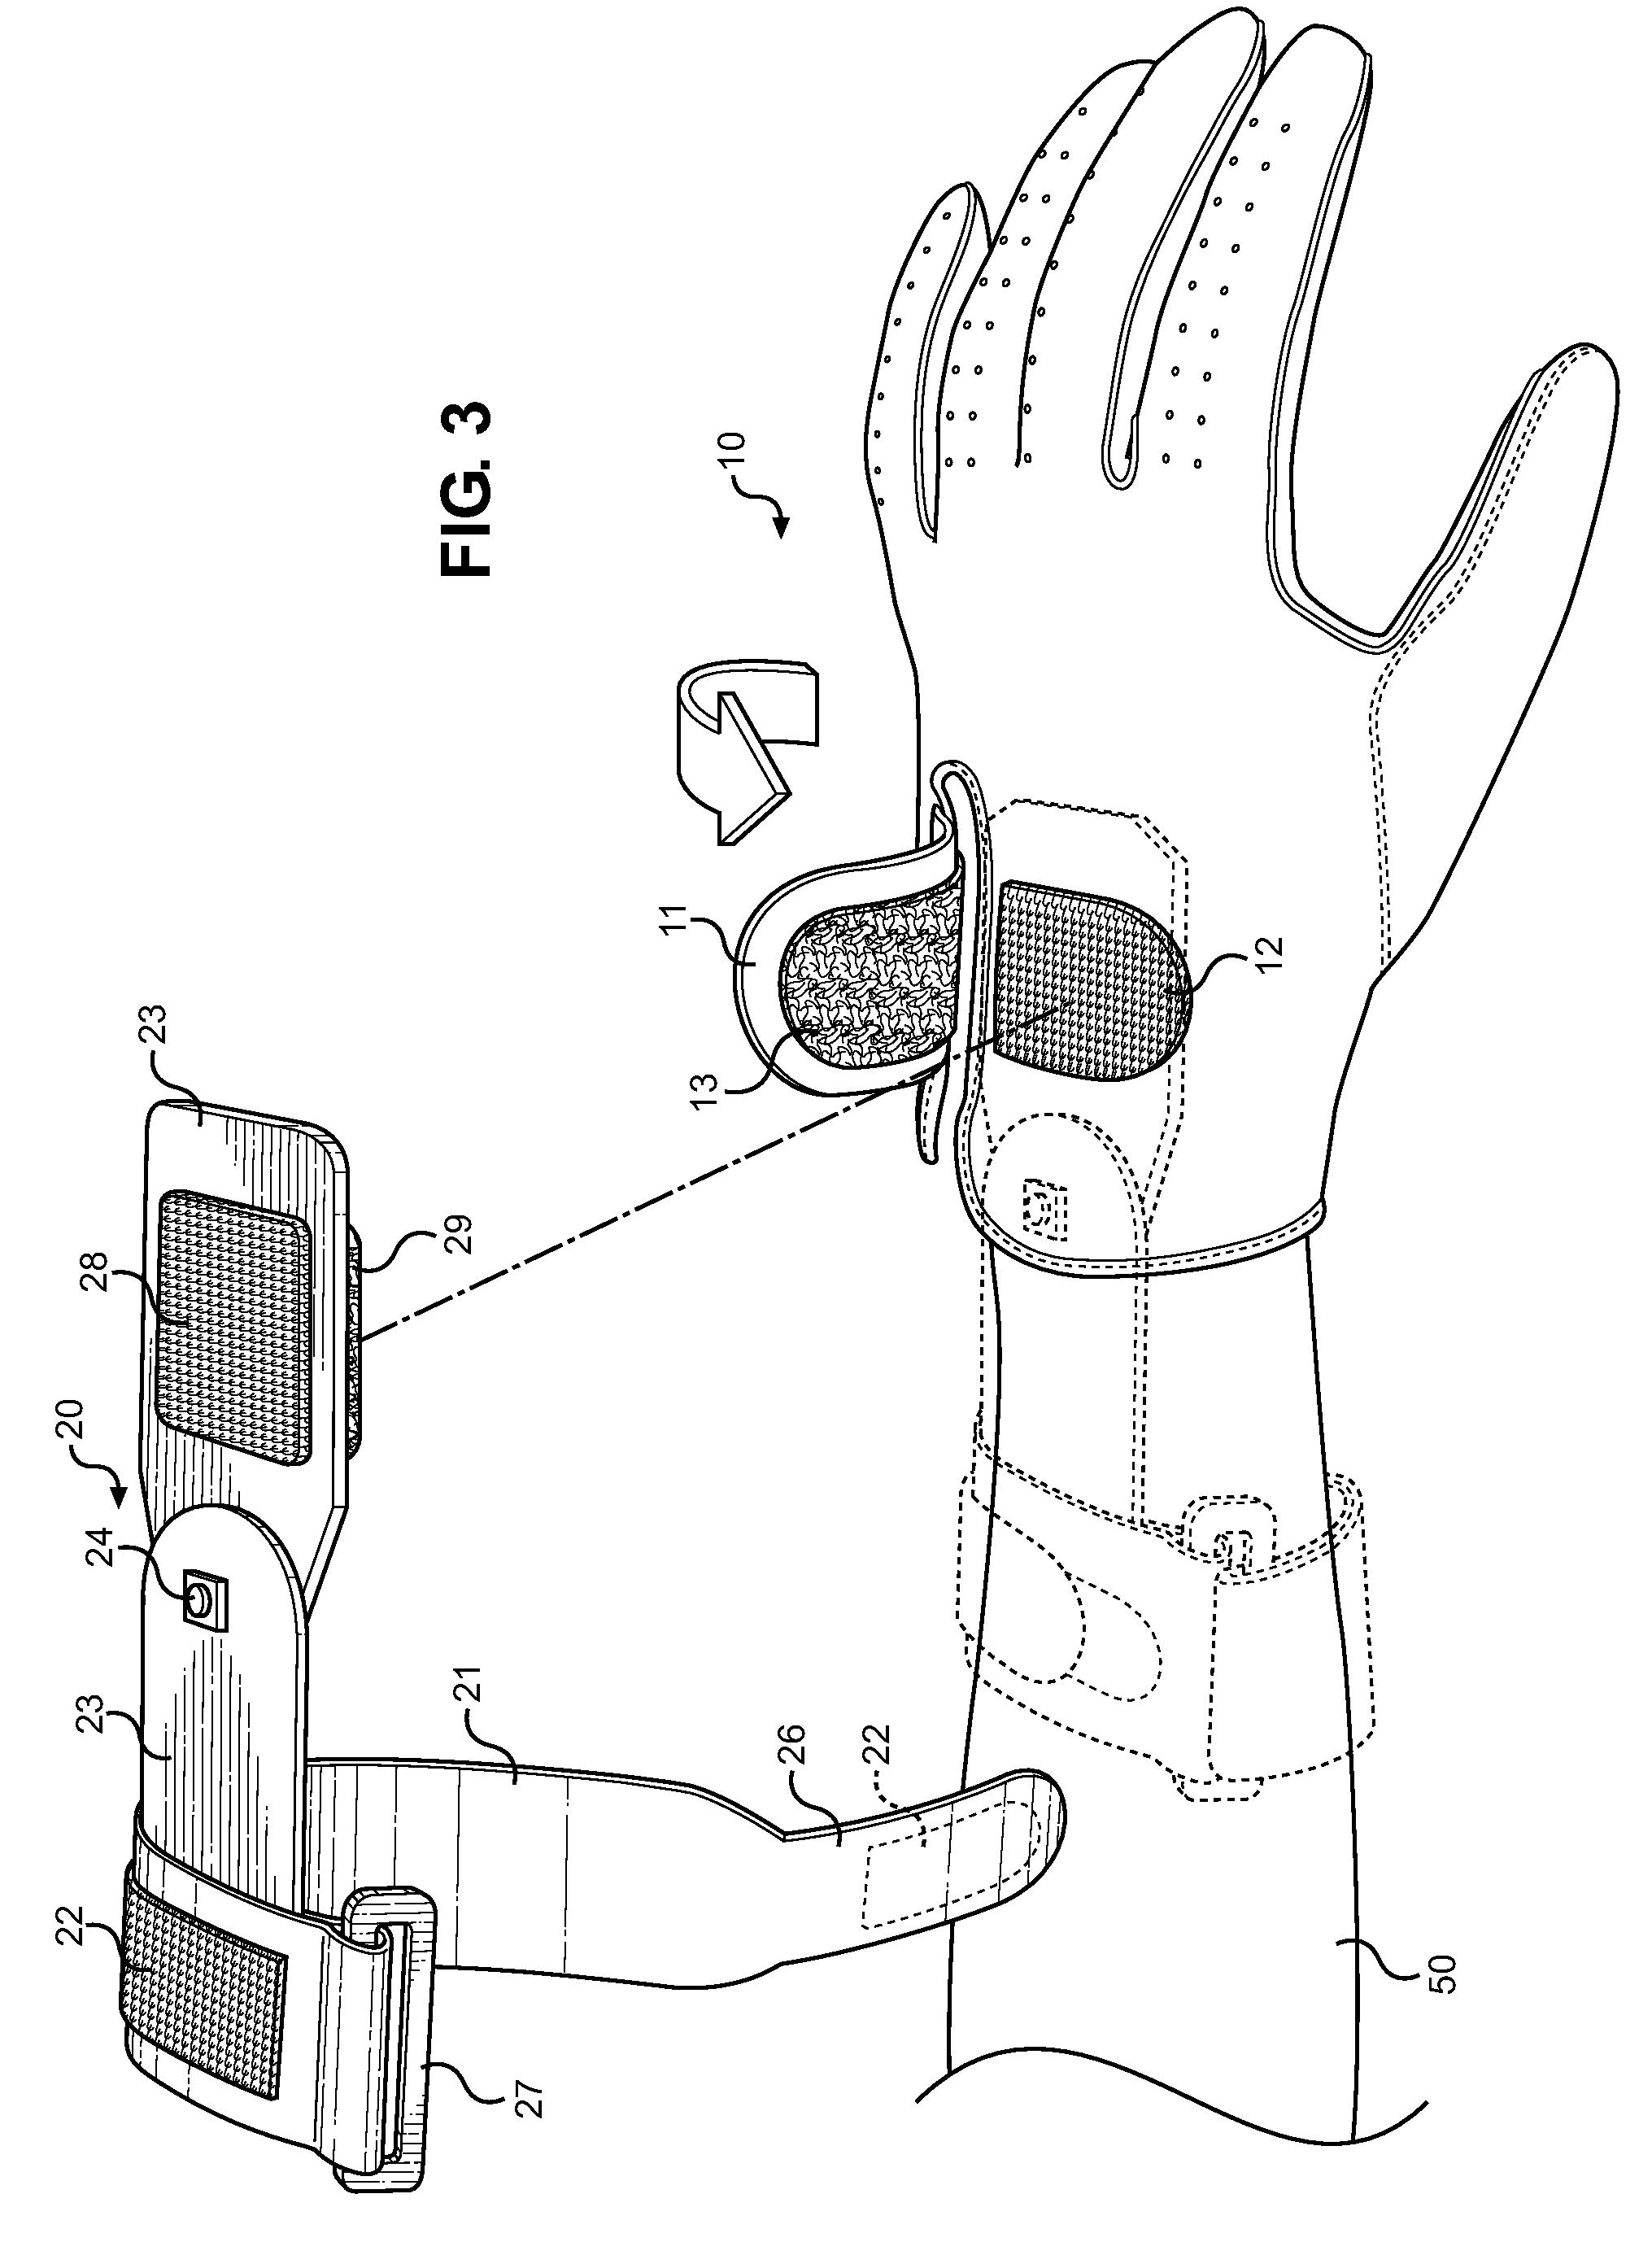 Wrist training device for a golf swing and putting stroke